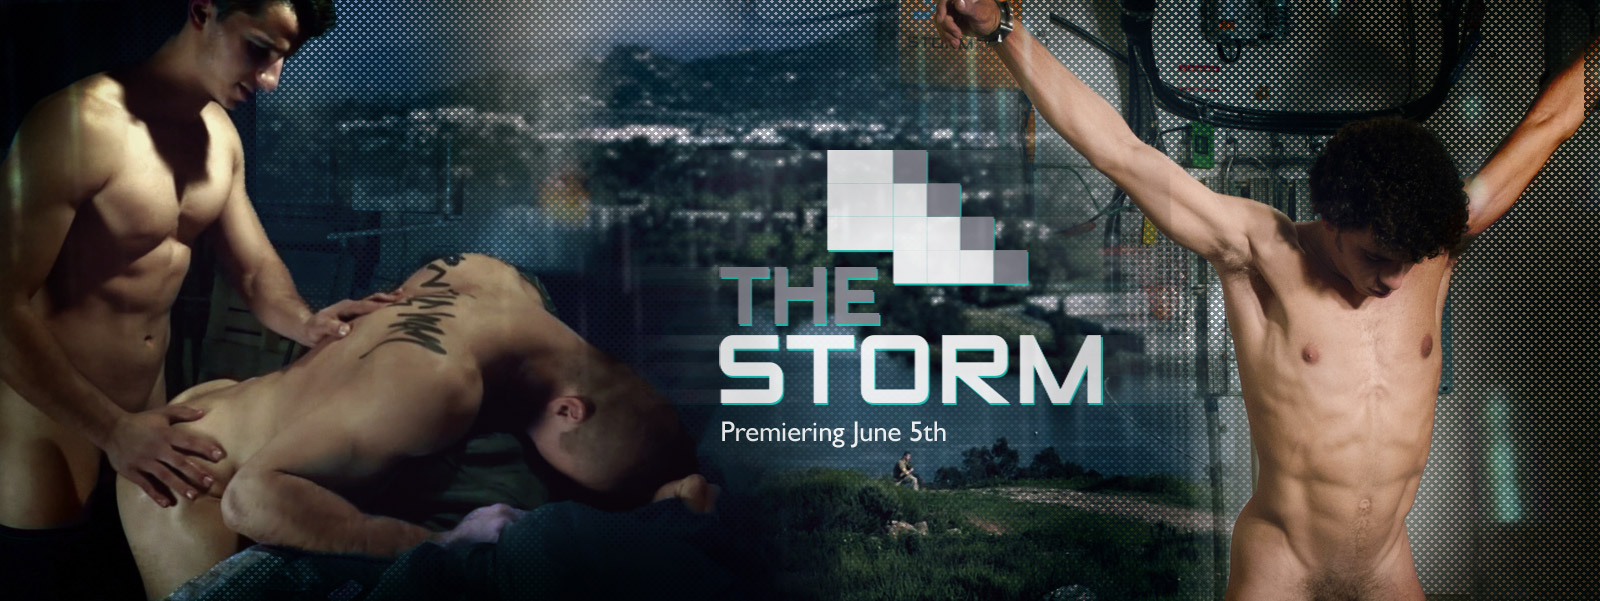 The Storm - Where twink sex become the new world currency